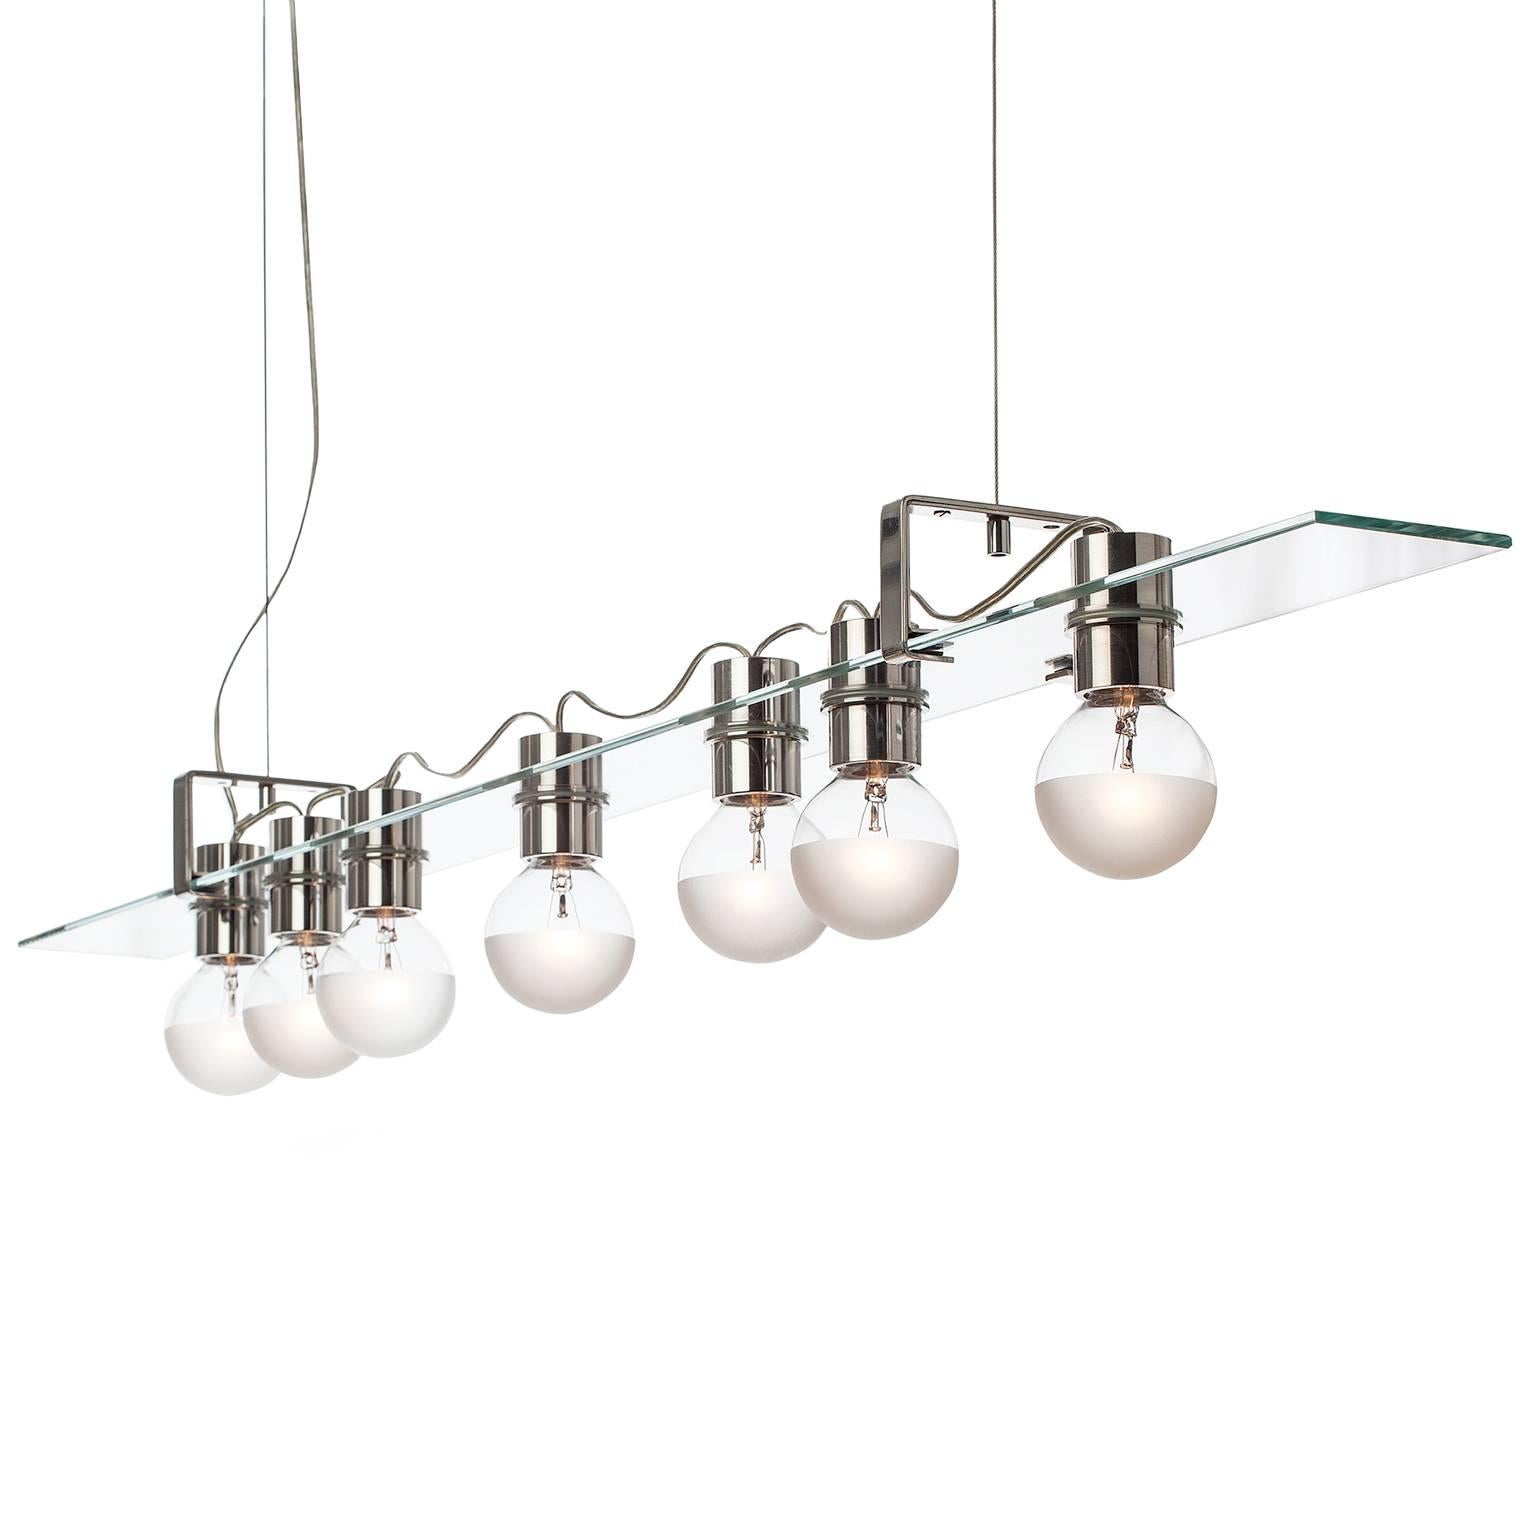 The float pendant features a glass panel held by two sets of interlocking aluminium brackets suspended from stainless steel cables. 

AVRAM RUSU STUDIO is a Brooklyn based design studio known for impeccably crafted and distinctly sculptural work.